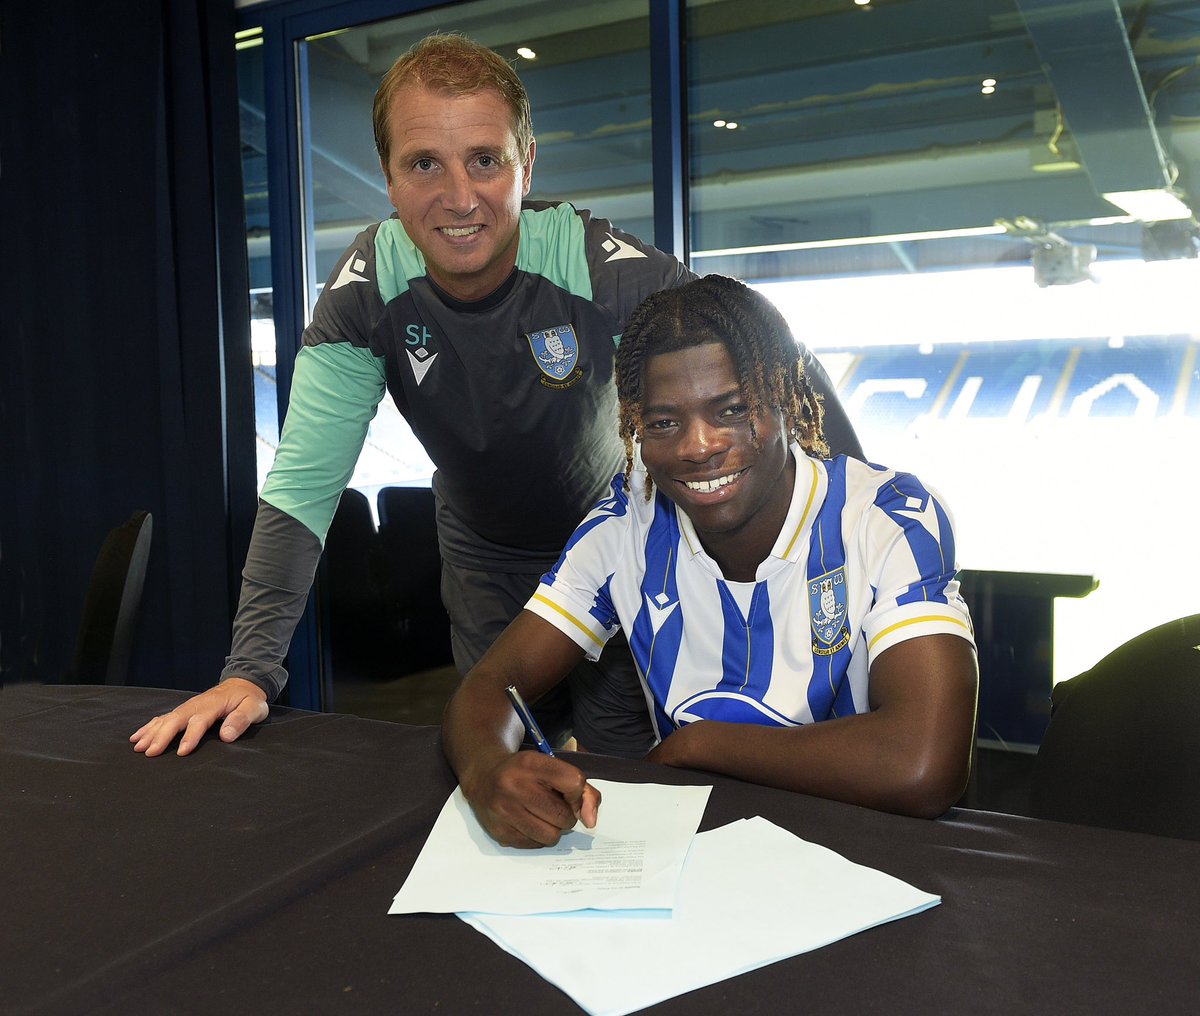 Very happy to have signed my first professional contract @swfcofficial proud moment for me and my family❤️the hard work continues. Thank you for all the support,all praise to the lord🙏🏿#swfc